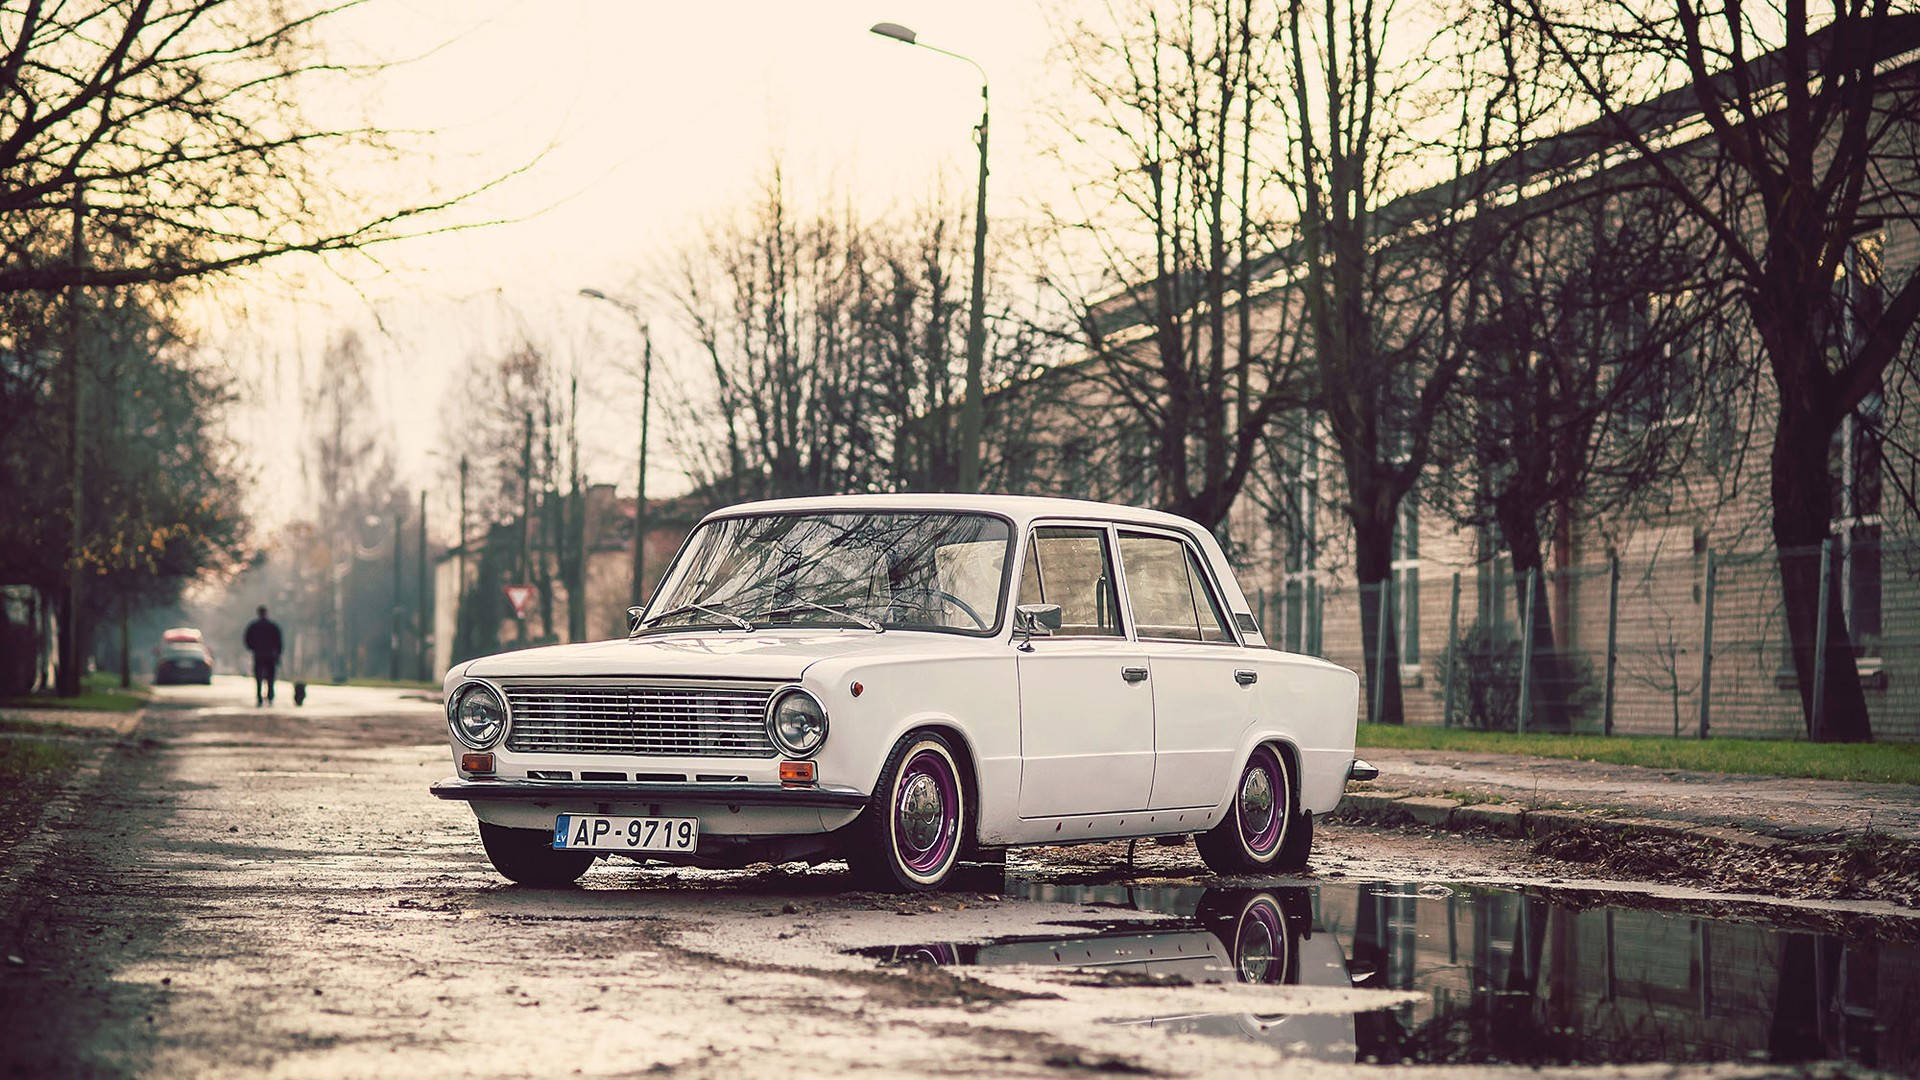 A Vintage Car In The Street Of Riga Wallpaper